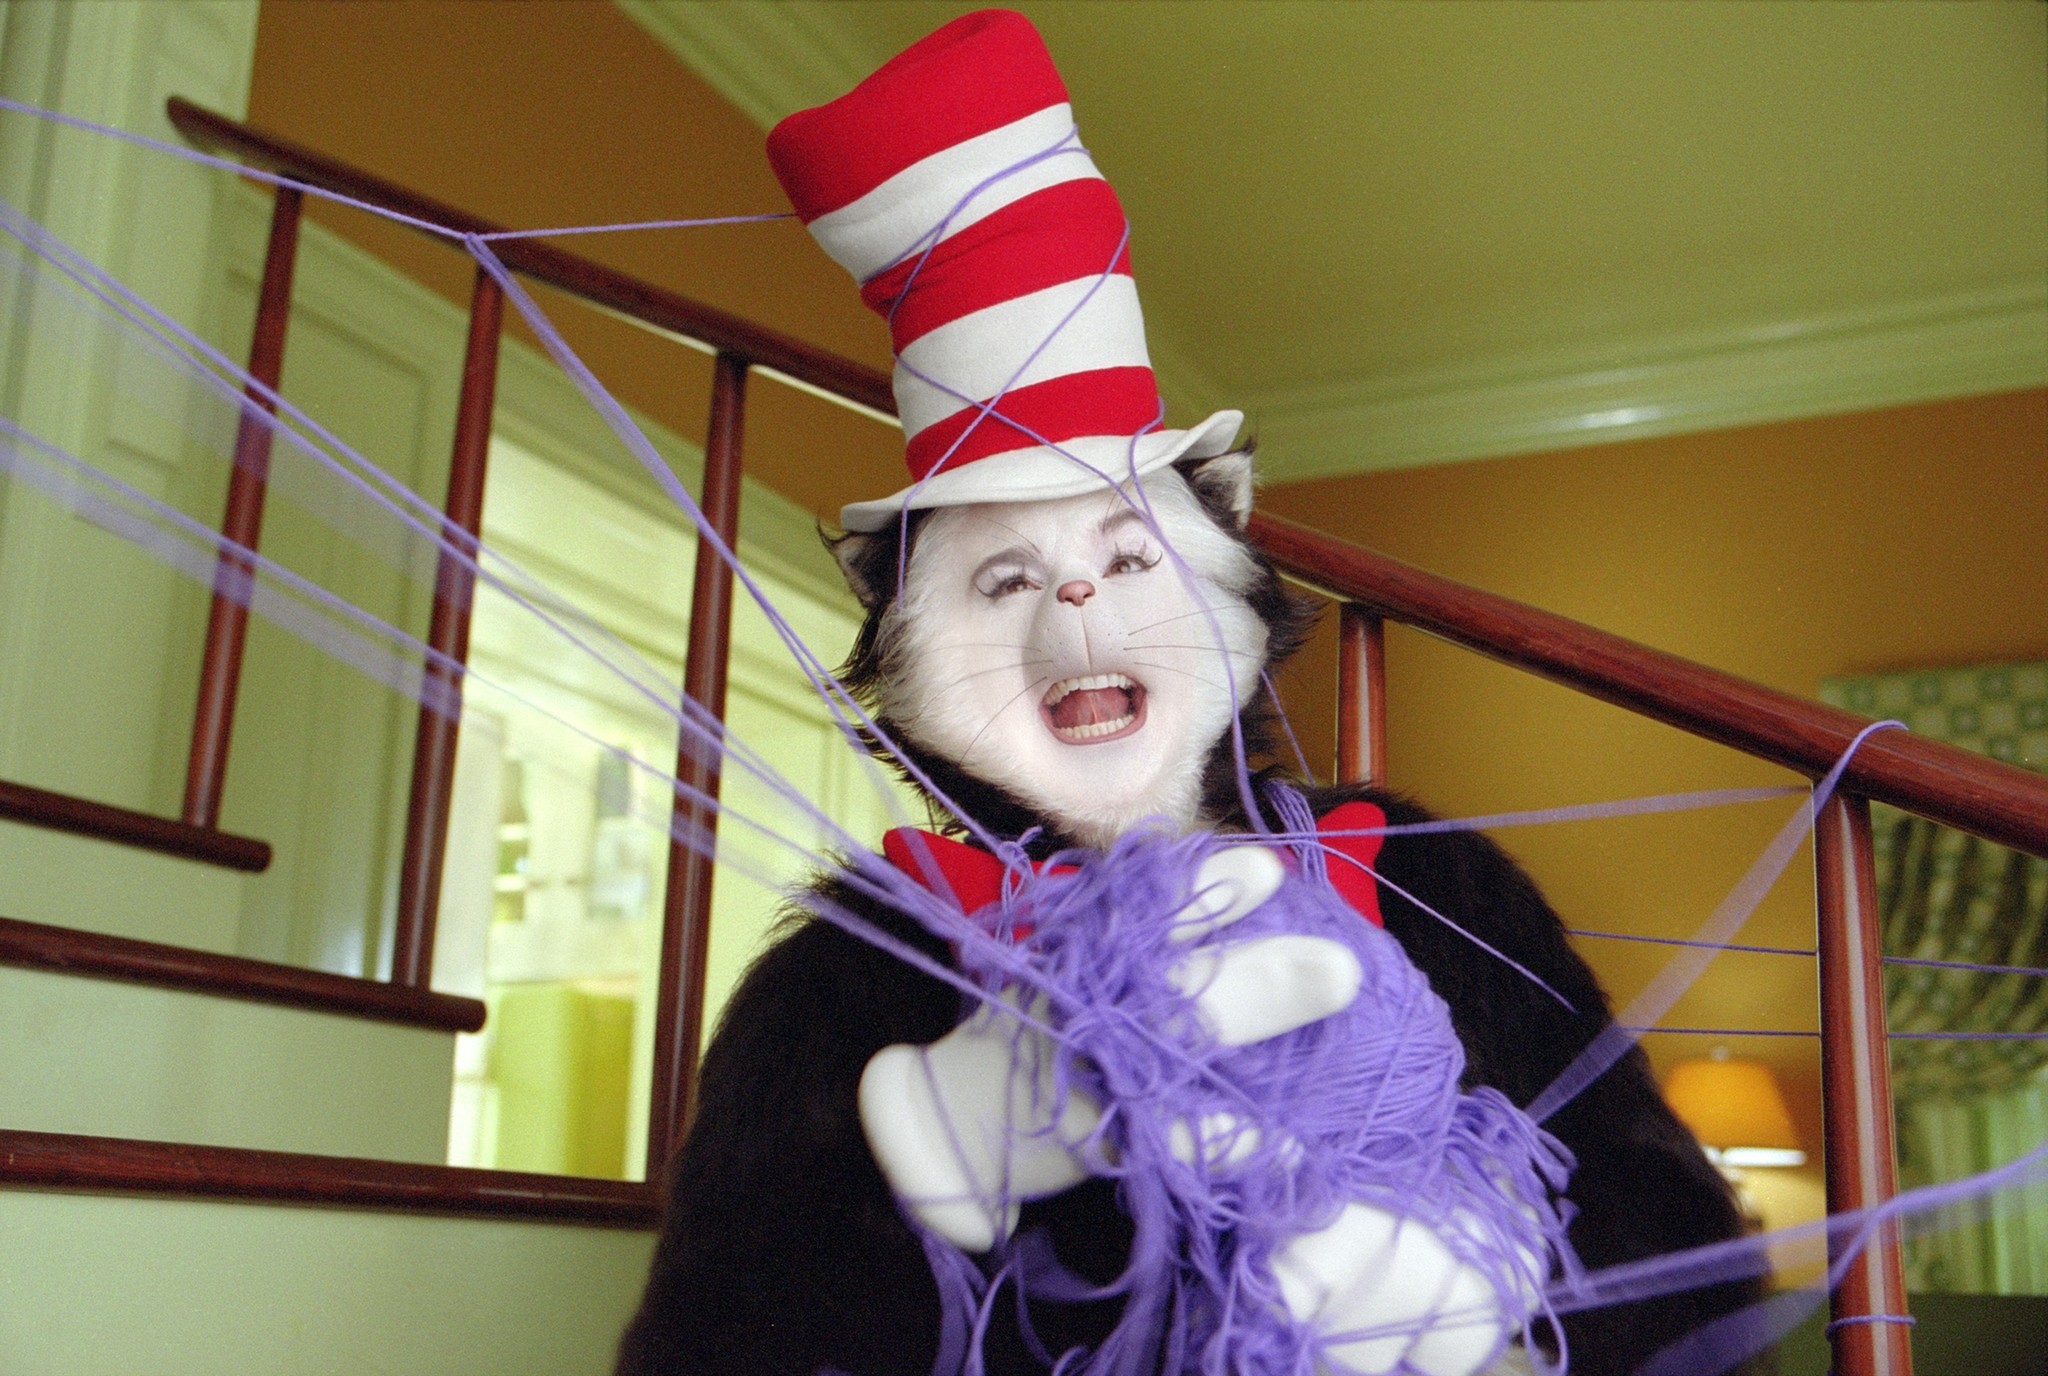 Sale > cat in the hat removed from netflix > in stock